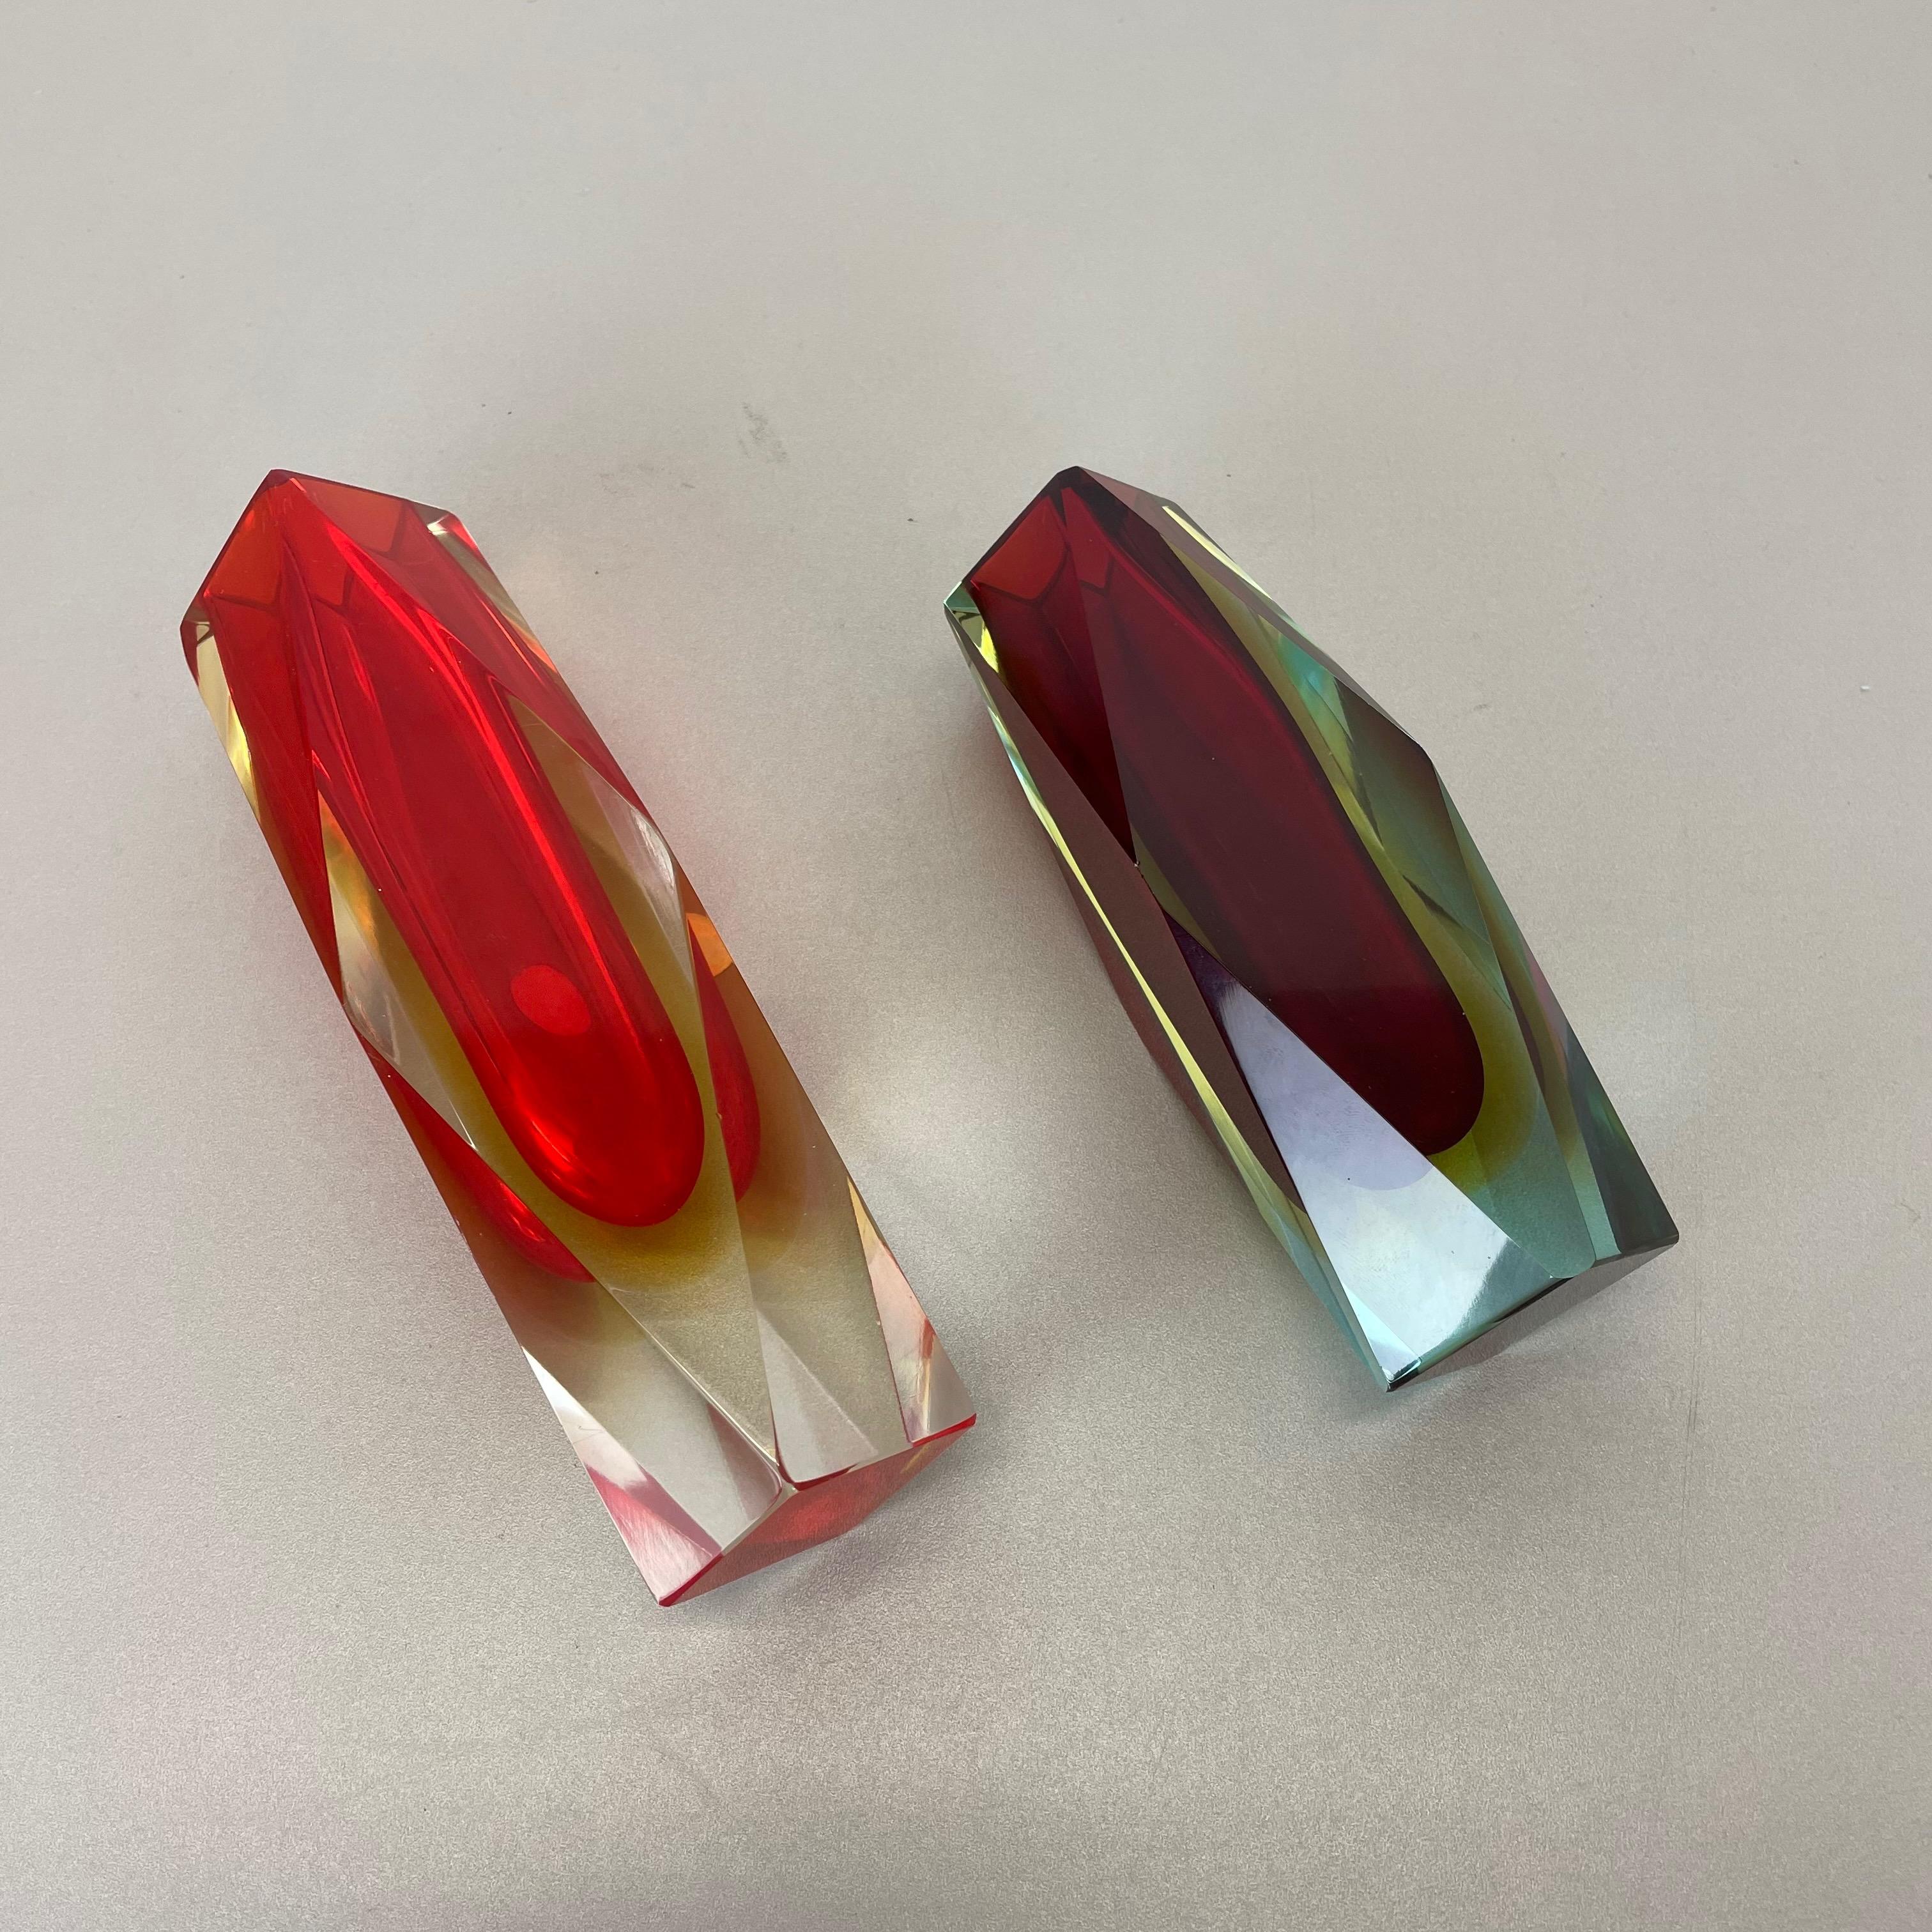 Set of 2 Faceted Murano Glass Sommerso Vase Designed by Flavio Poli Italy, 1970s For Sale 10